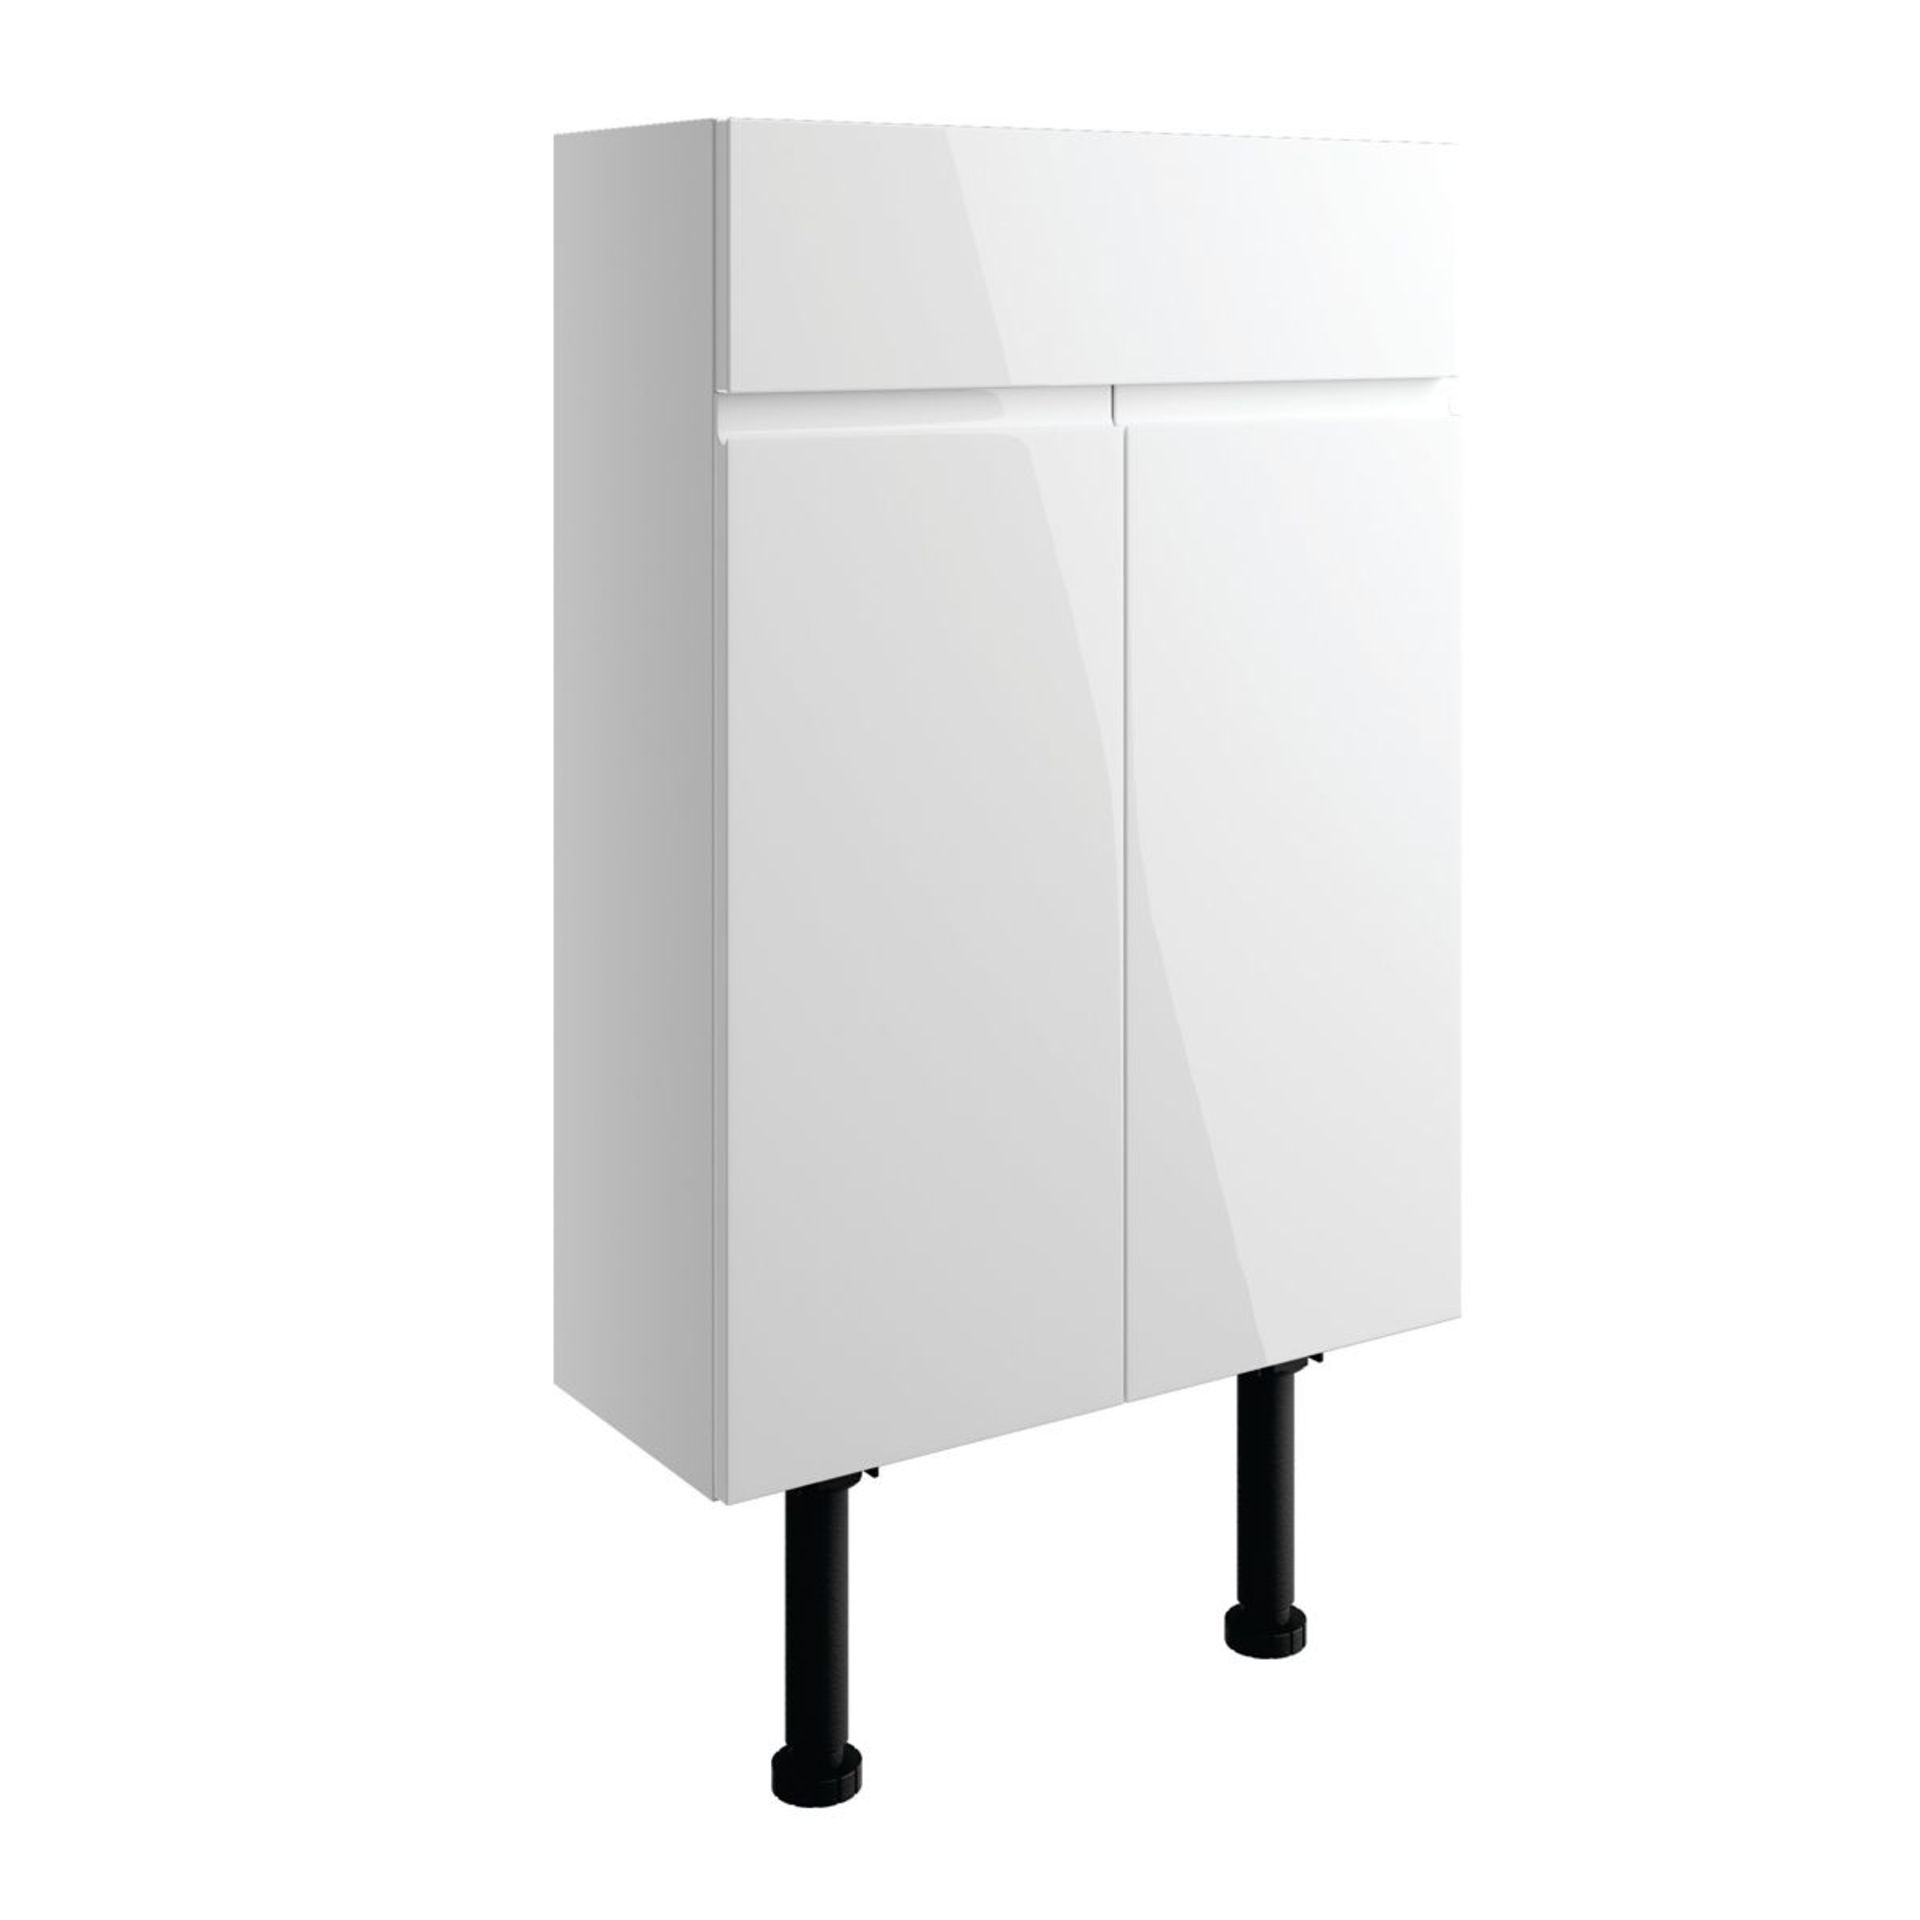 New (L101) Valesso White Gloss Vanity Unit 600mm. RRP £305.00.Finished In White Gloss Adjustab... - Image 2 of 2